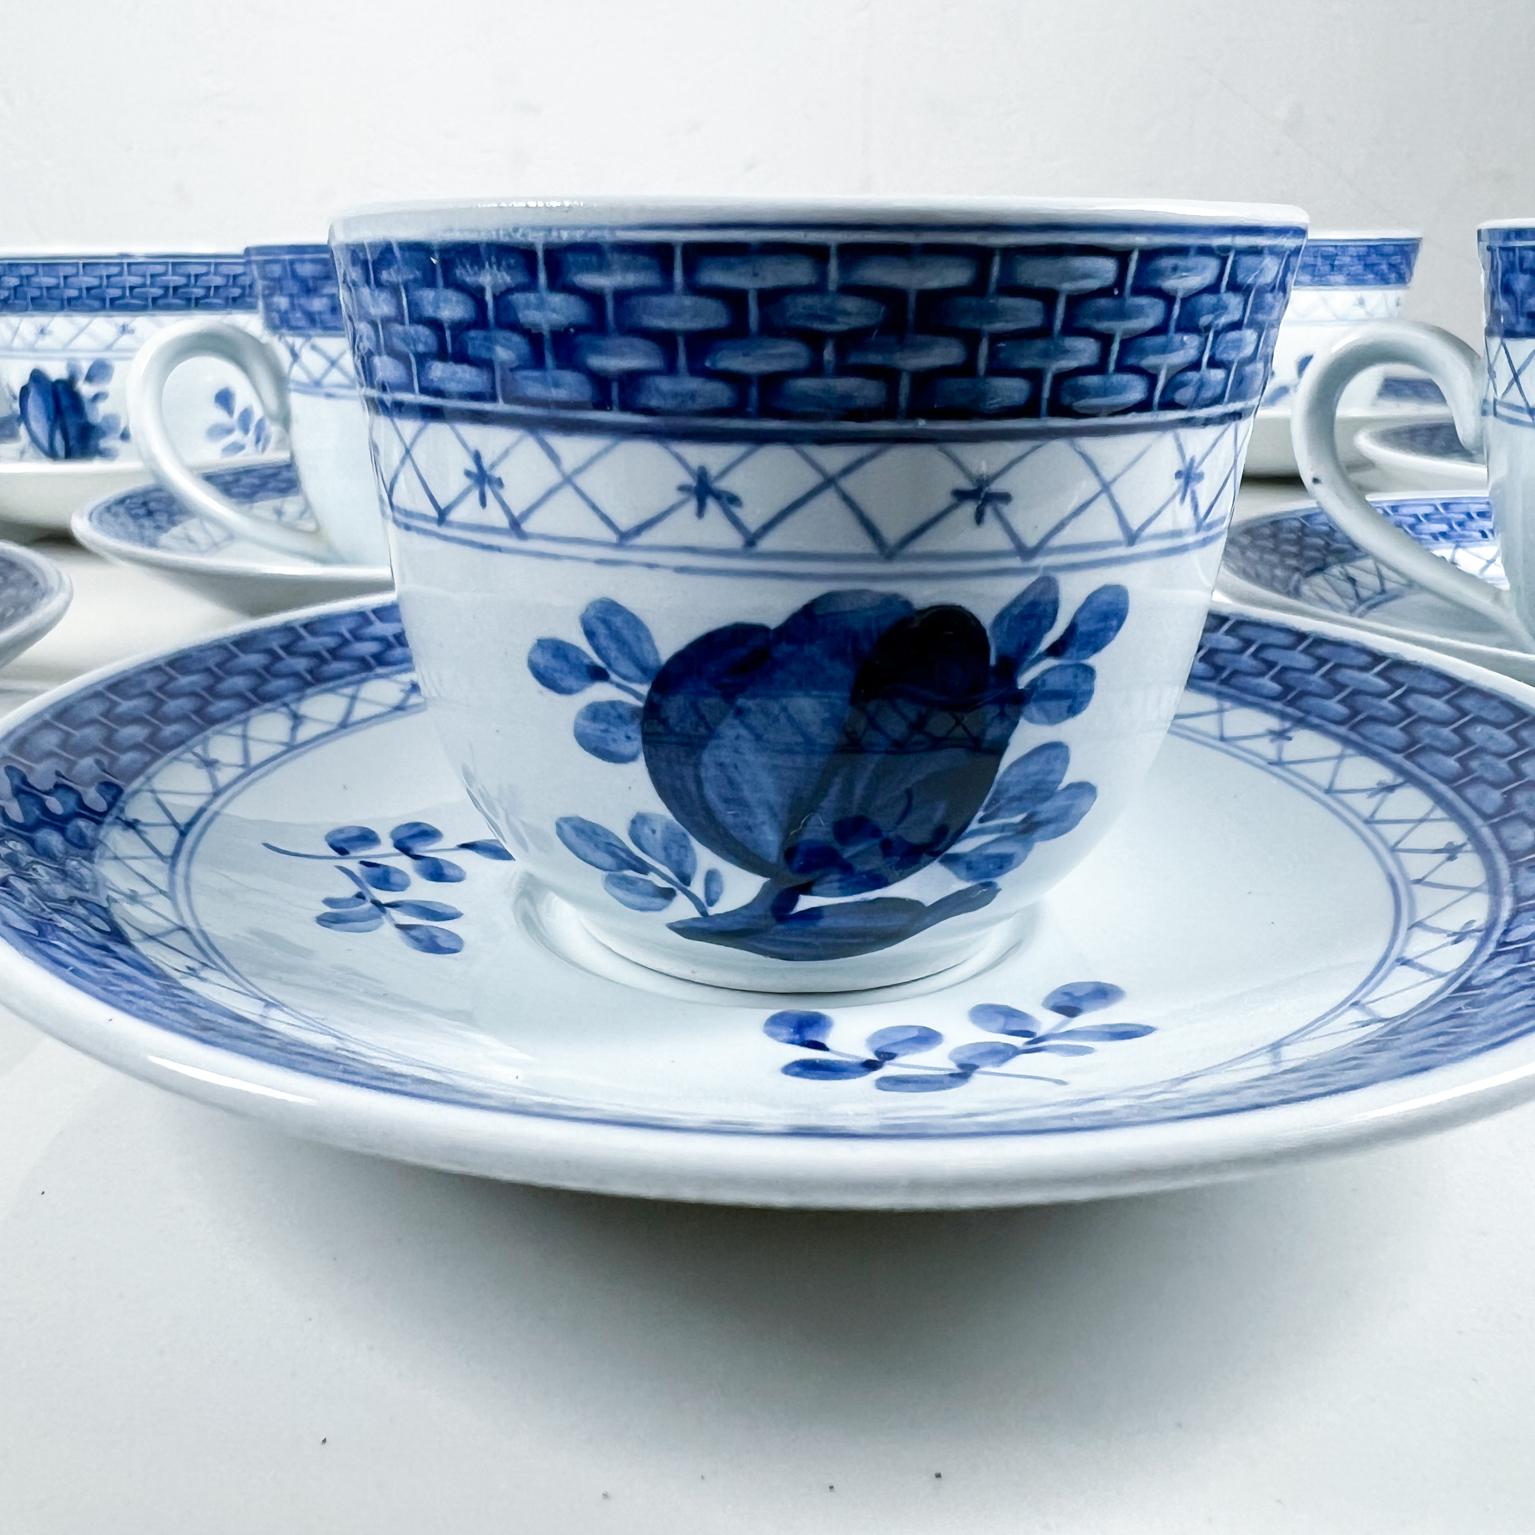 1960s Royal Copenhagen Denmark Delightful Coffee Cup and Saucer Service for 12 In Good Condition For Sale In Chula Vista, CA